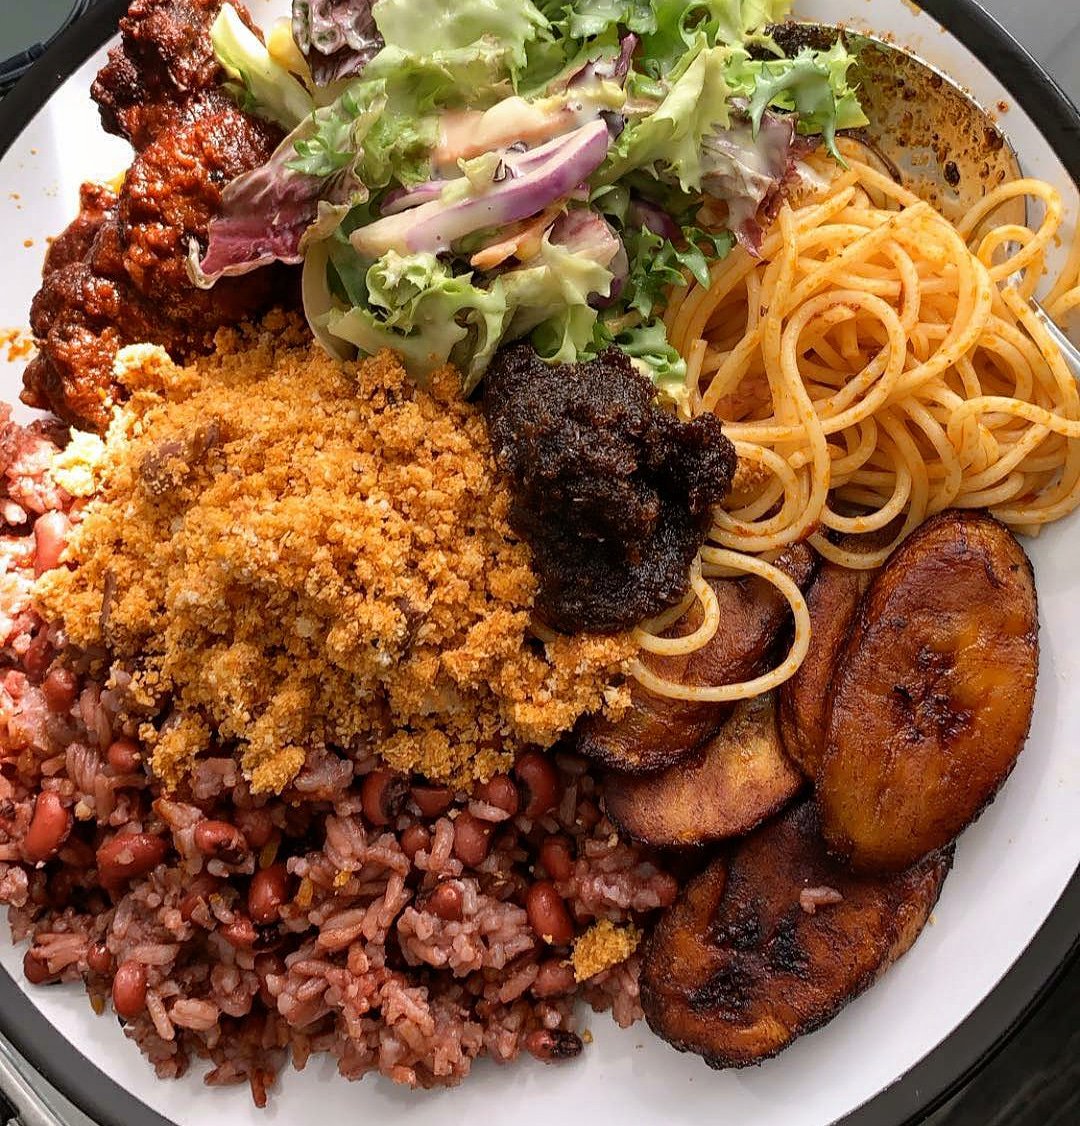 When the #Waakye is home cooked and all the classics are repping.
#waakyewednesday just got better! 
Delicious Ghana.
We are drooling! 
Thanks for sharing and showcasing our Ghanaian cuisine @TasteGhana #GhanaFoodNetwork #BanPlasticGhana #EcofriendlyHabits #EcofriendlyUtensils